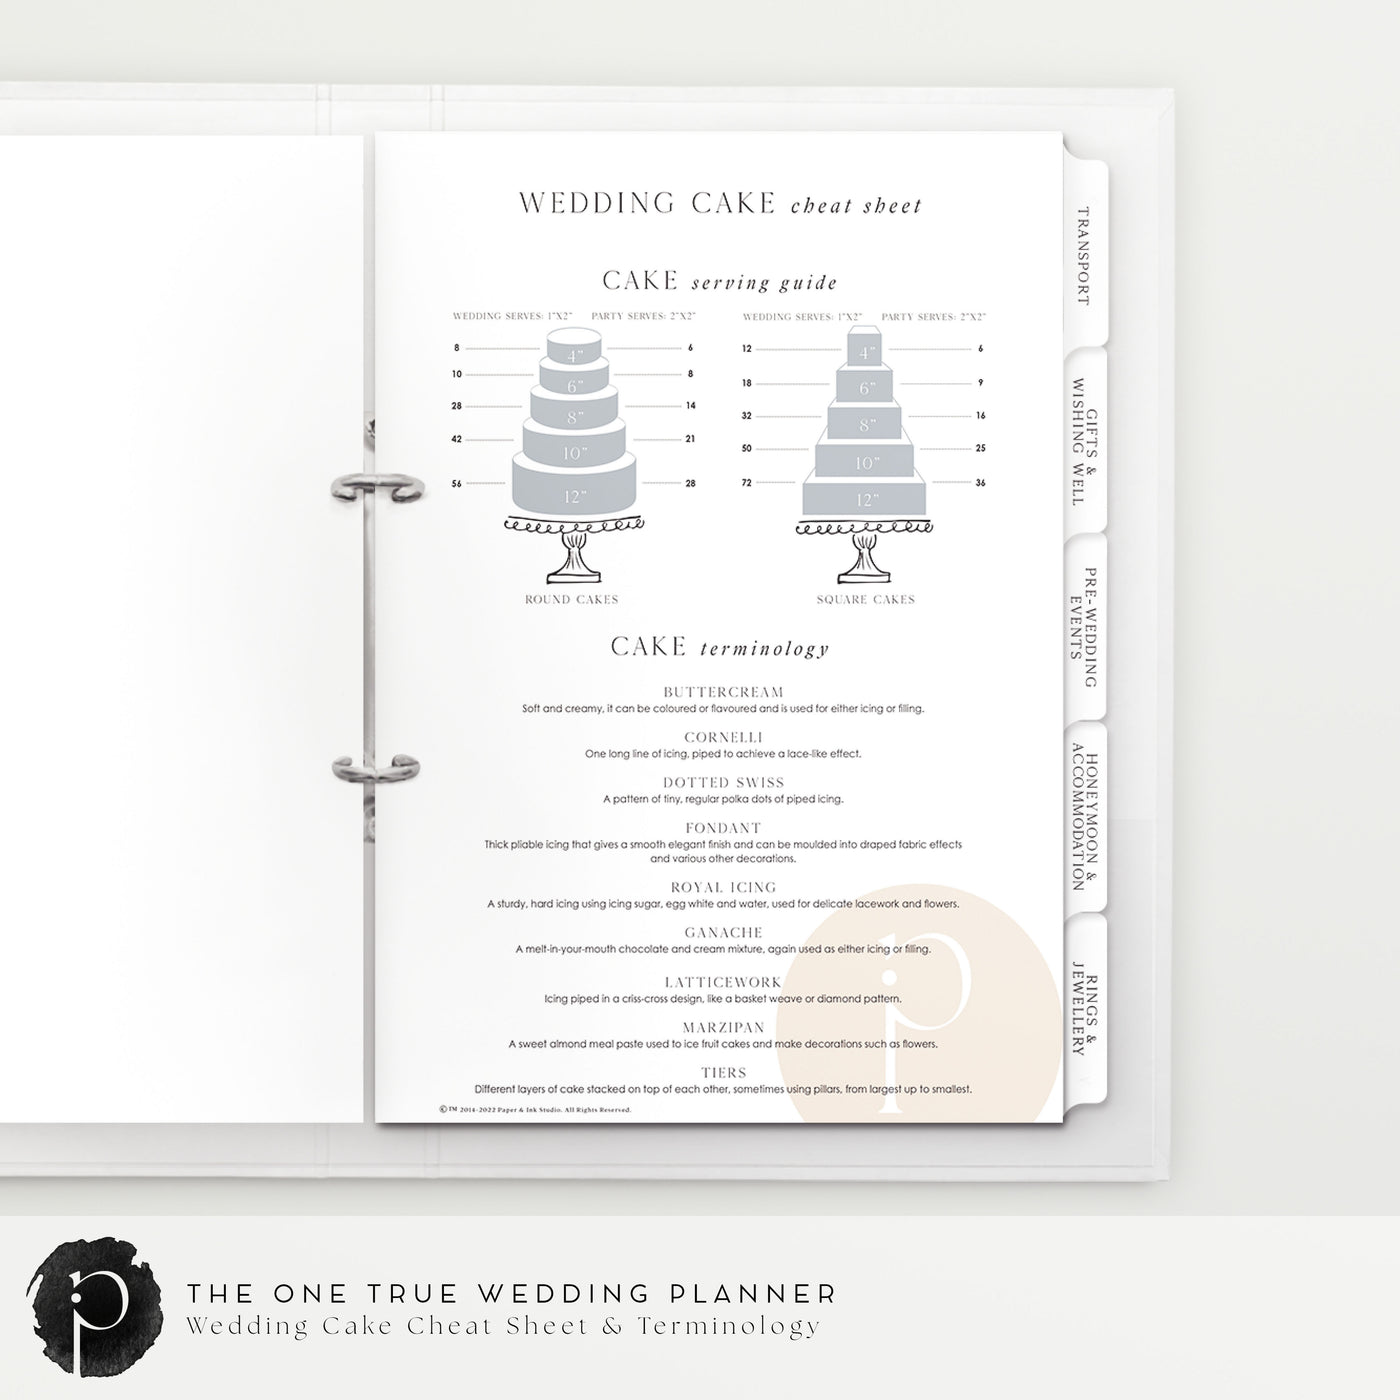 An example of one of the wedding cake and wedding dessert information pages you can find in the wedding planner and organiser made by Paper and Ink Studio.